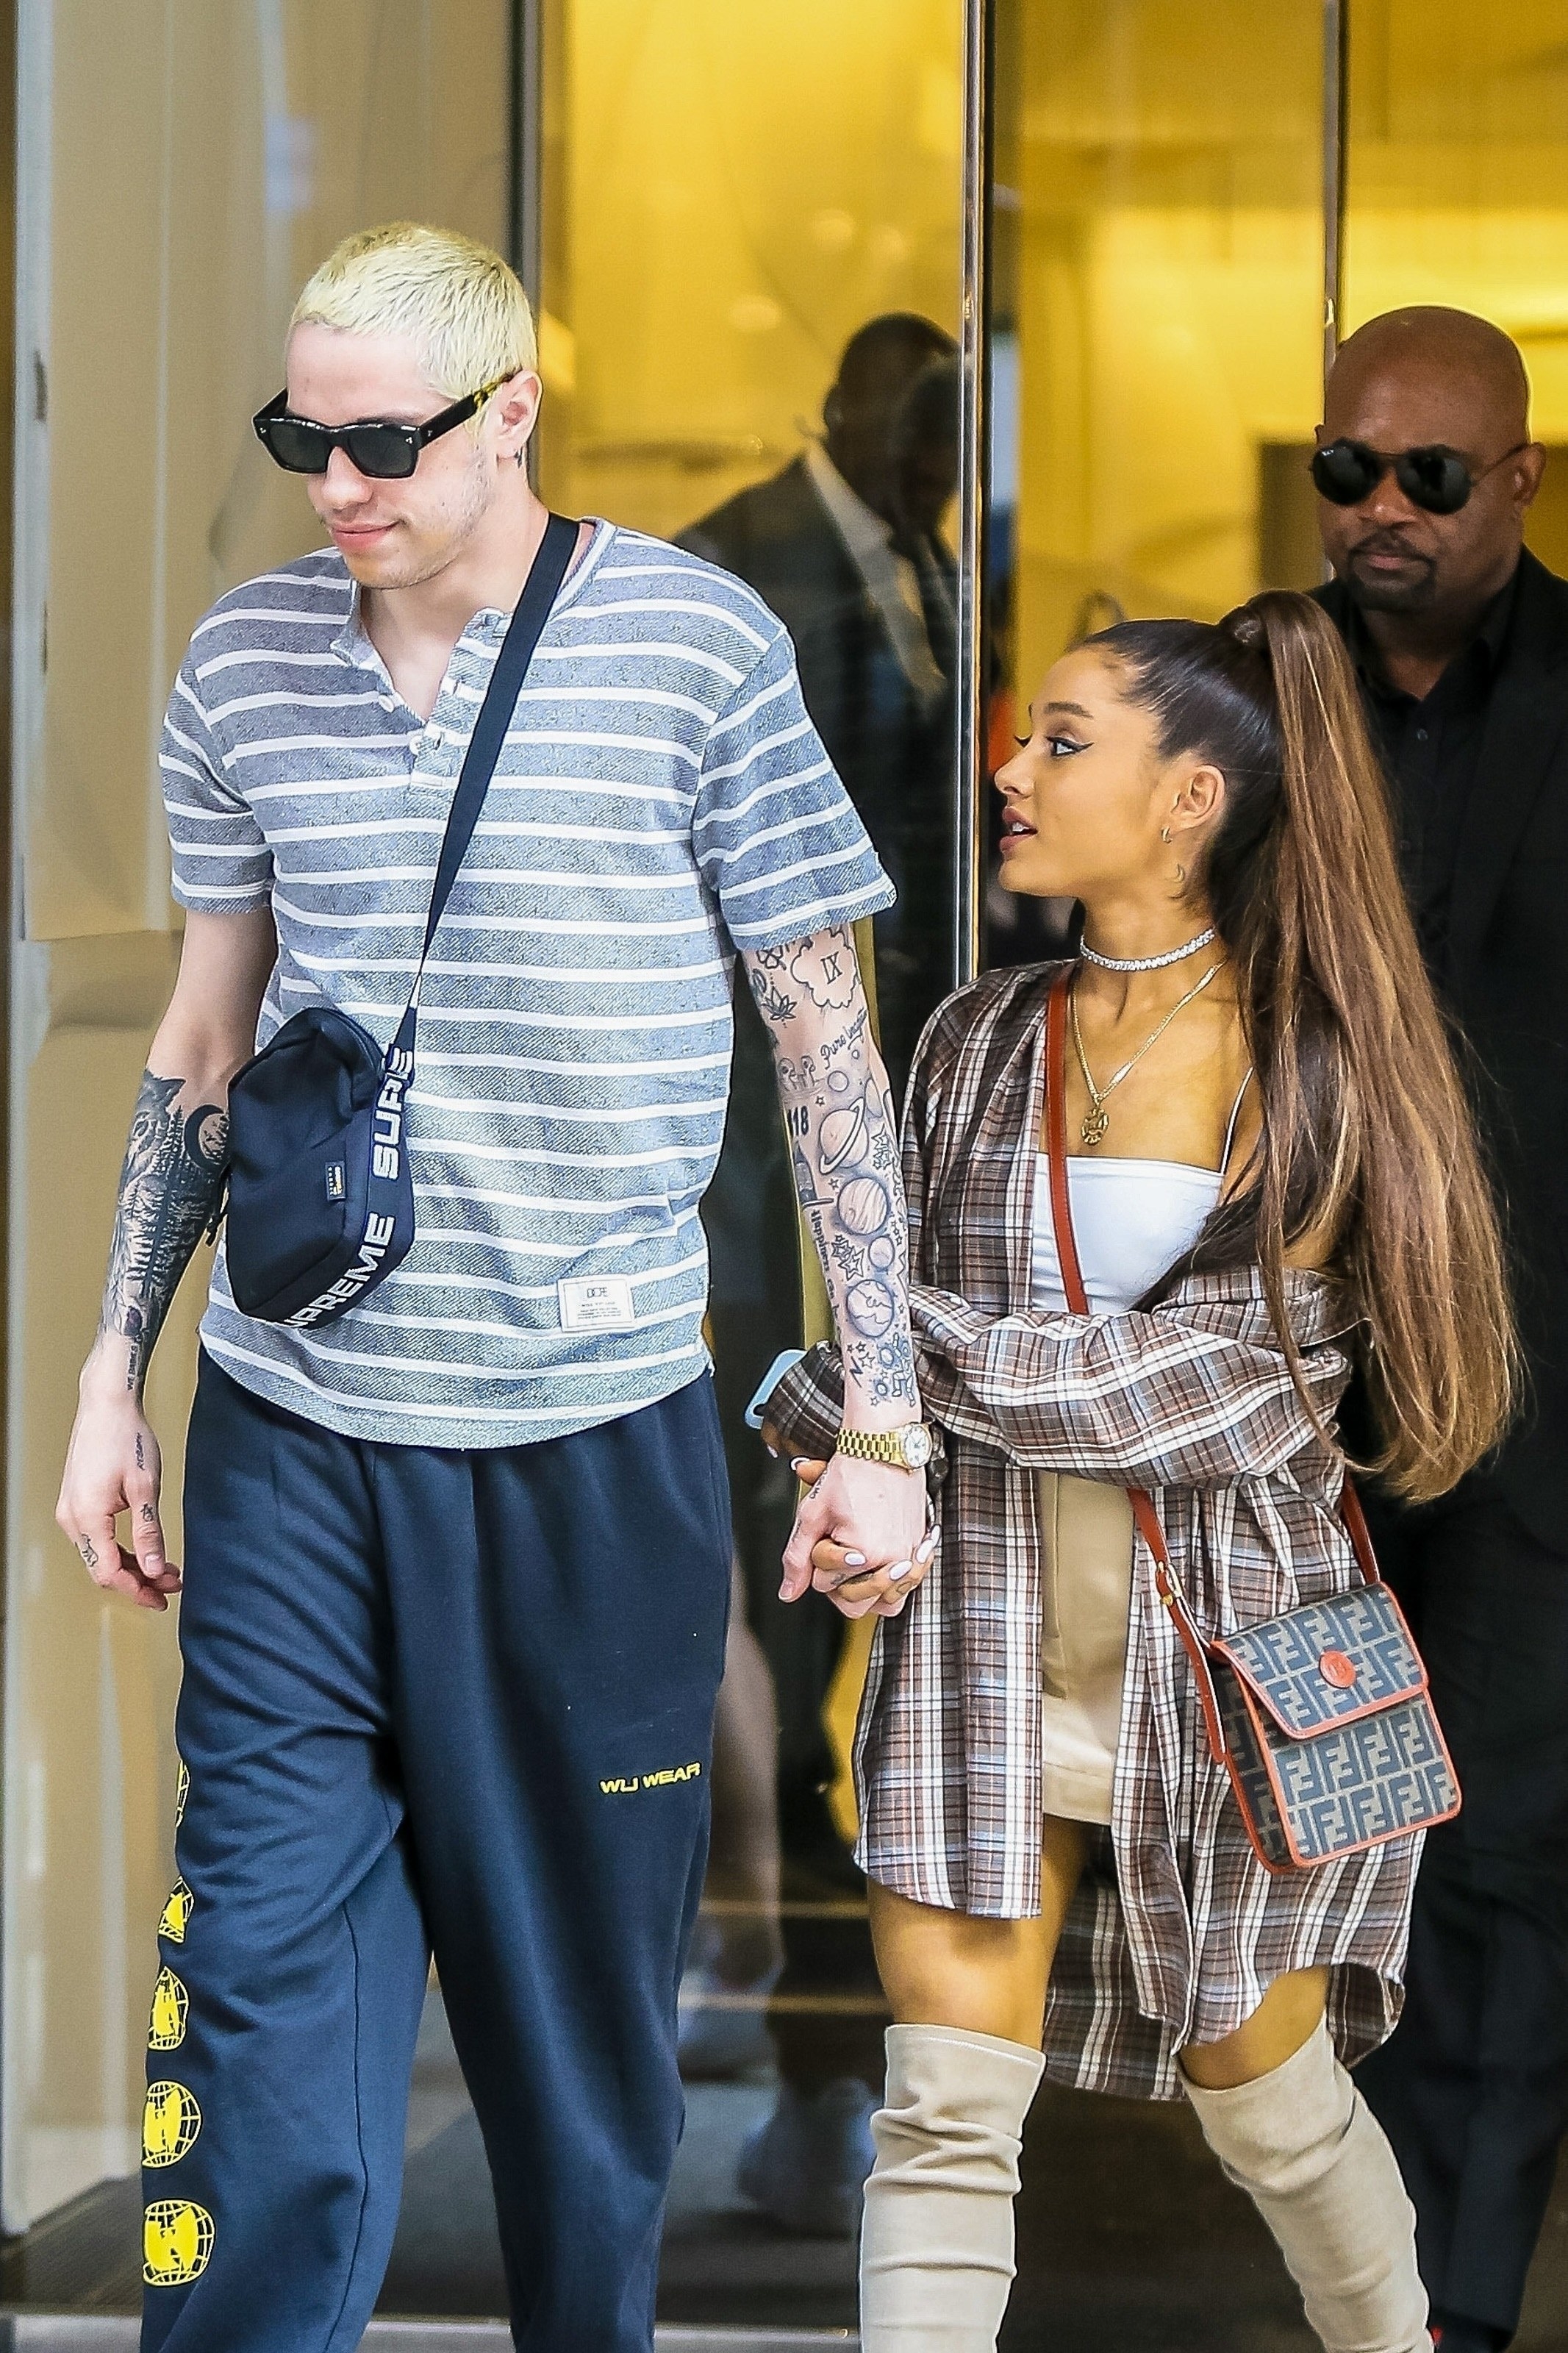 Pete and Ariana holding hands and walking